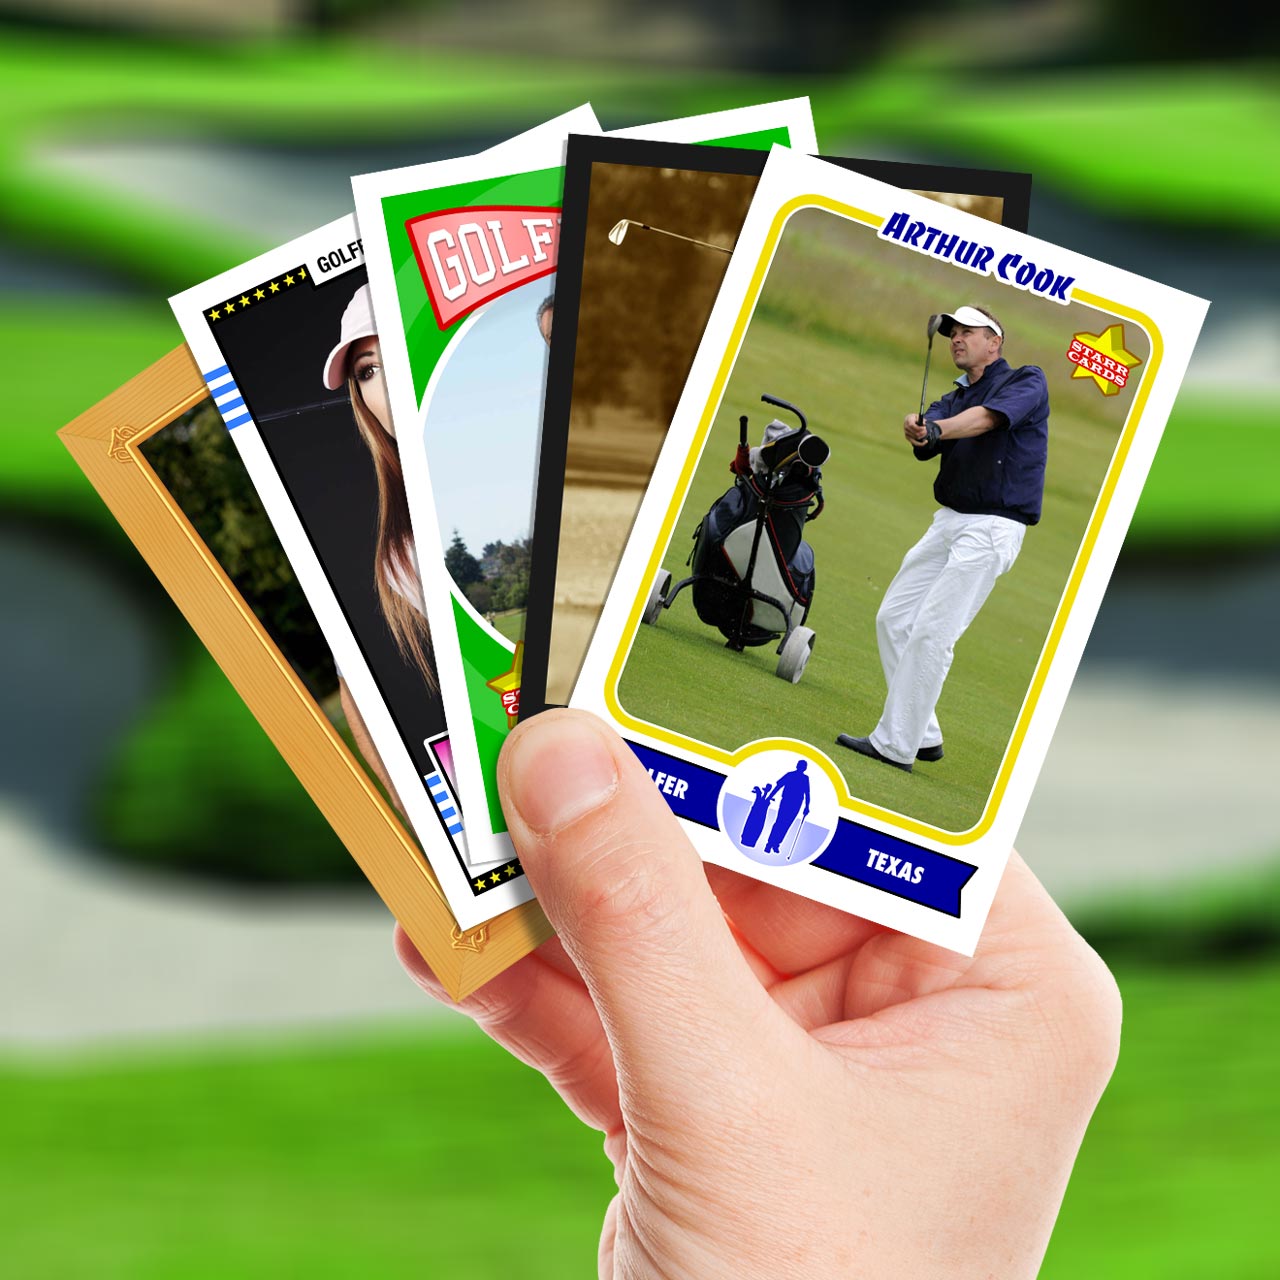 Make your own golf card with Starr Cards.